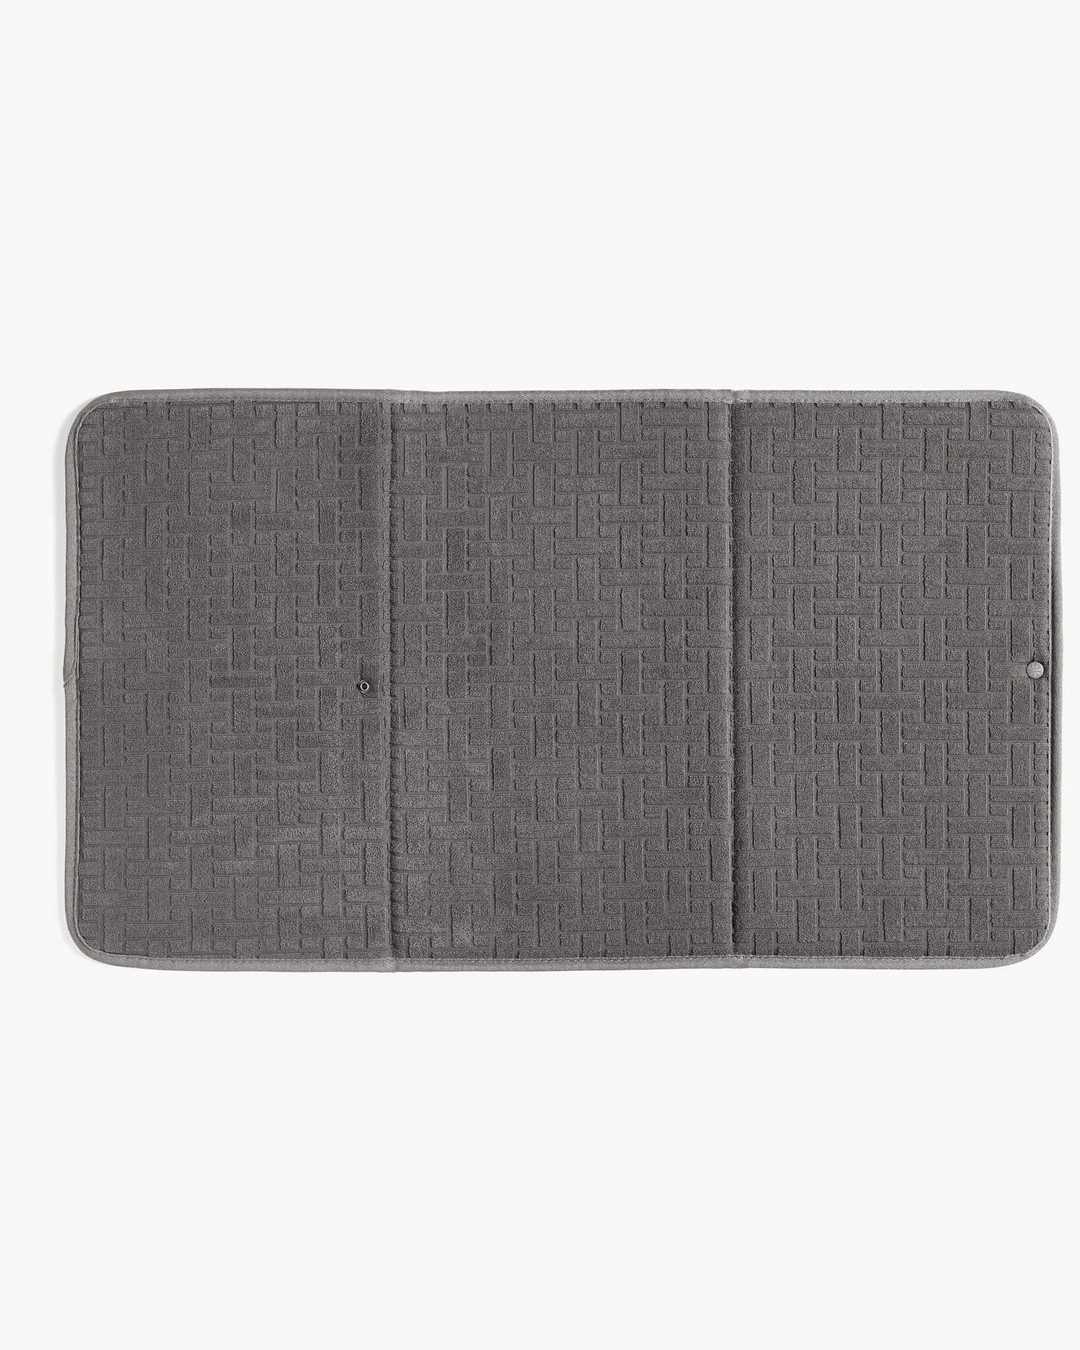 Harrison Drying Mat in Charcoal